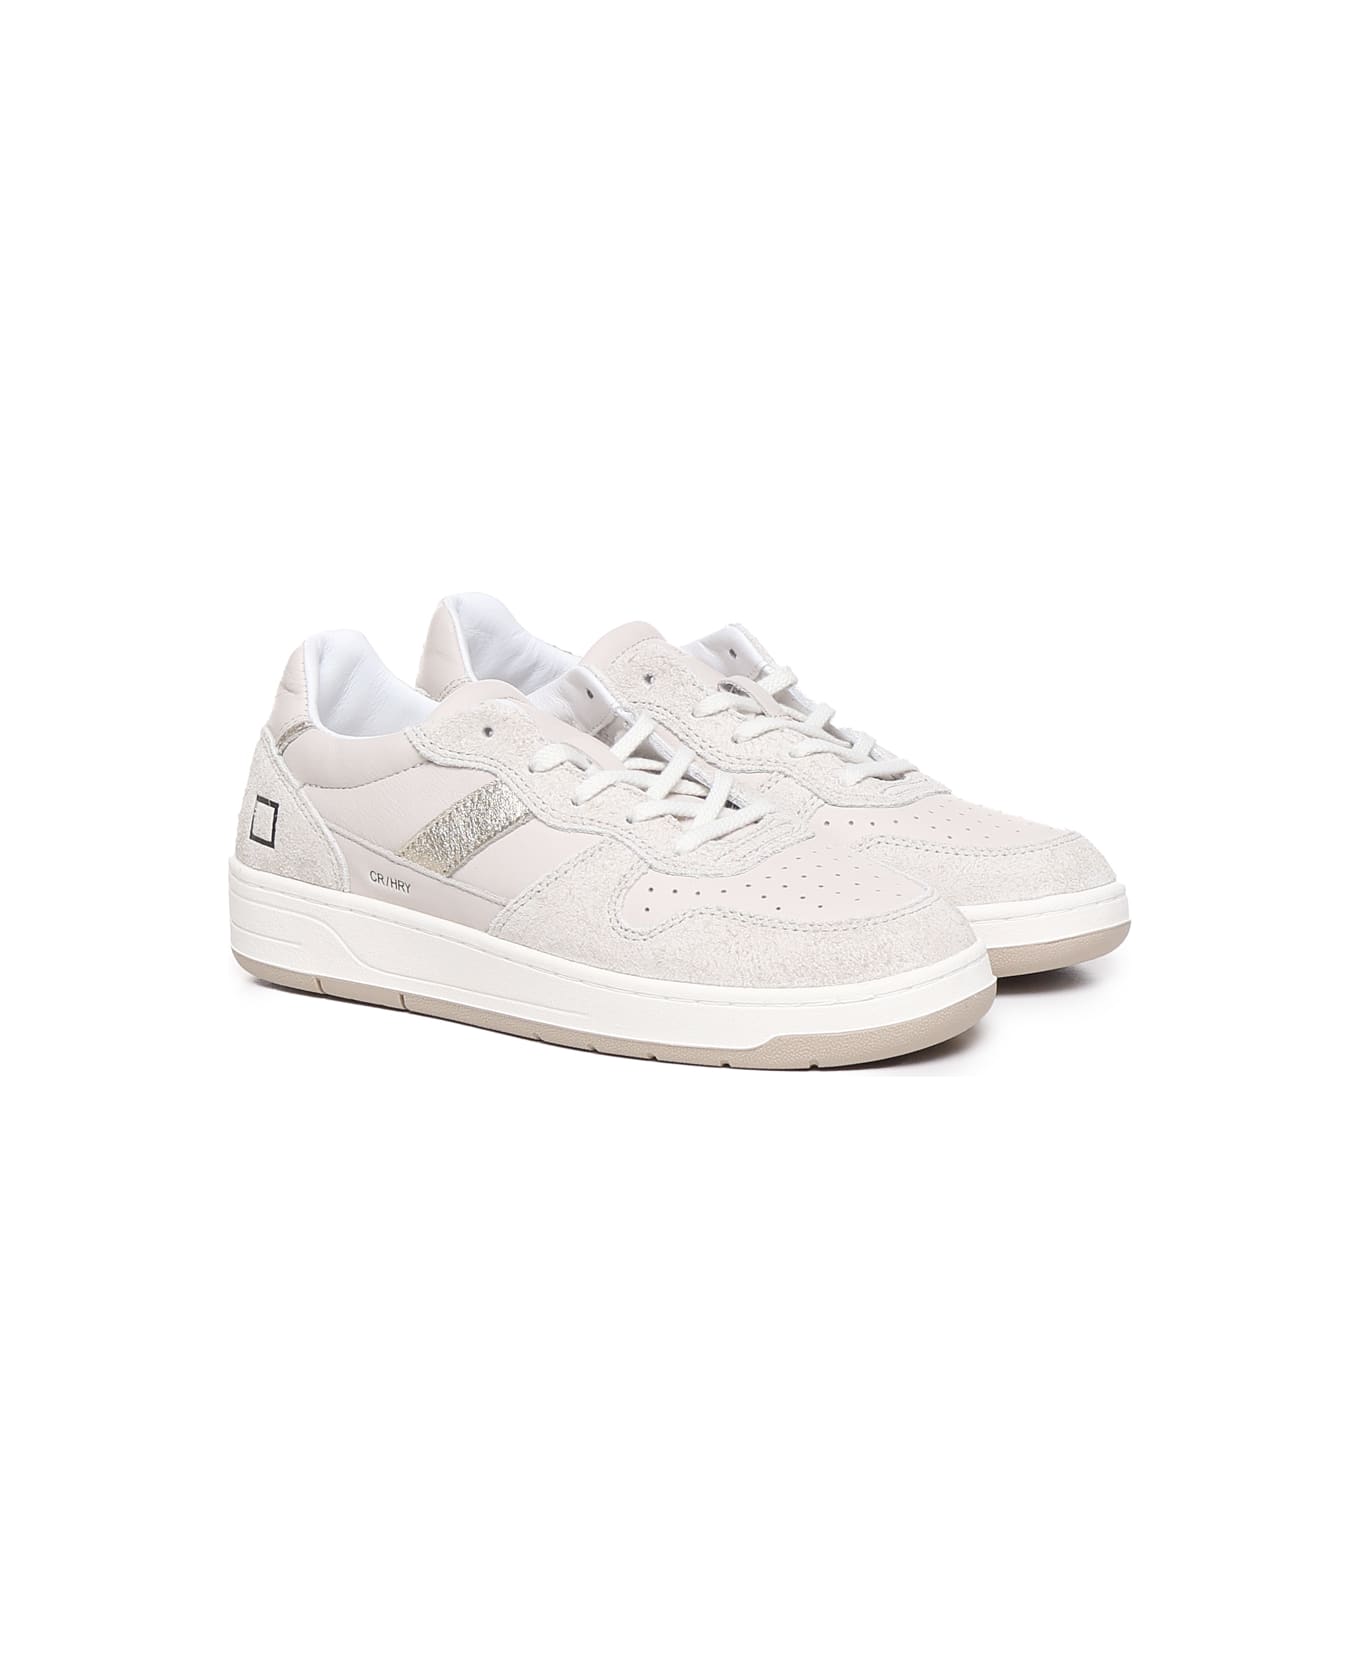 D.A.T.E. Court 2.0 Sneakers - Ivory スニーカー